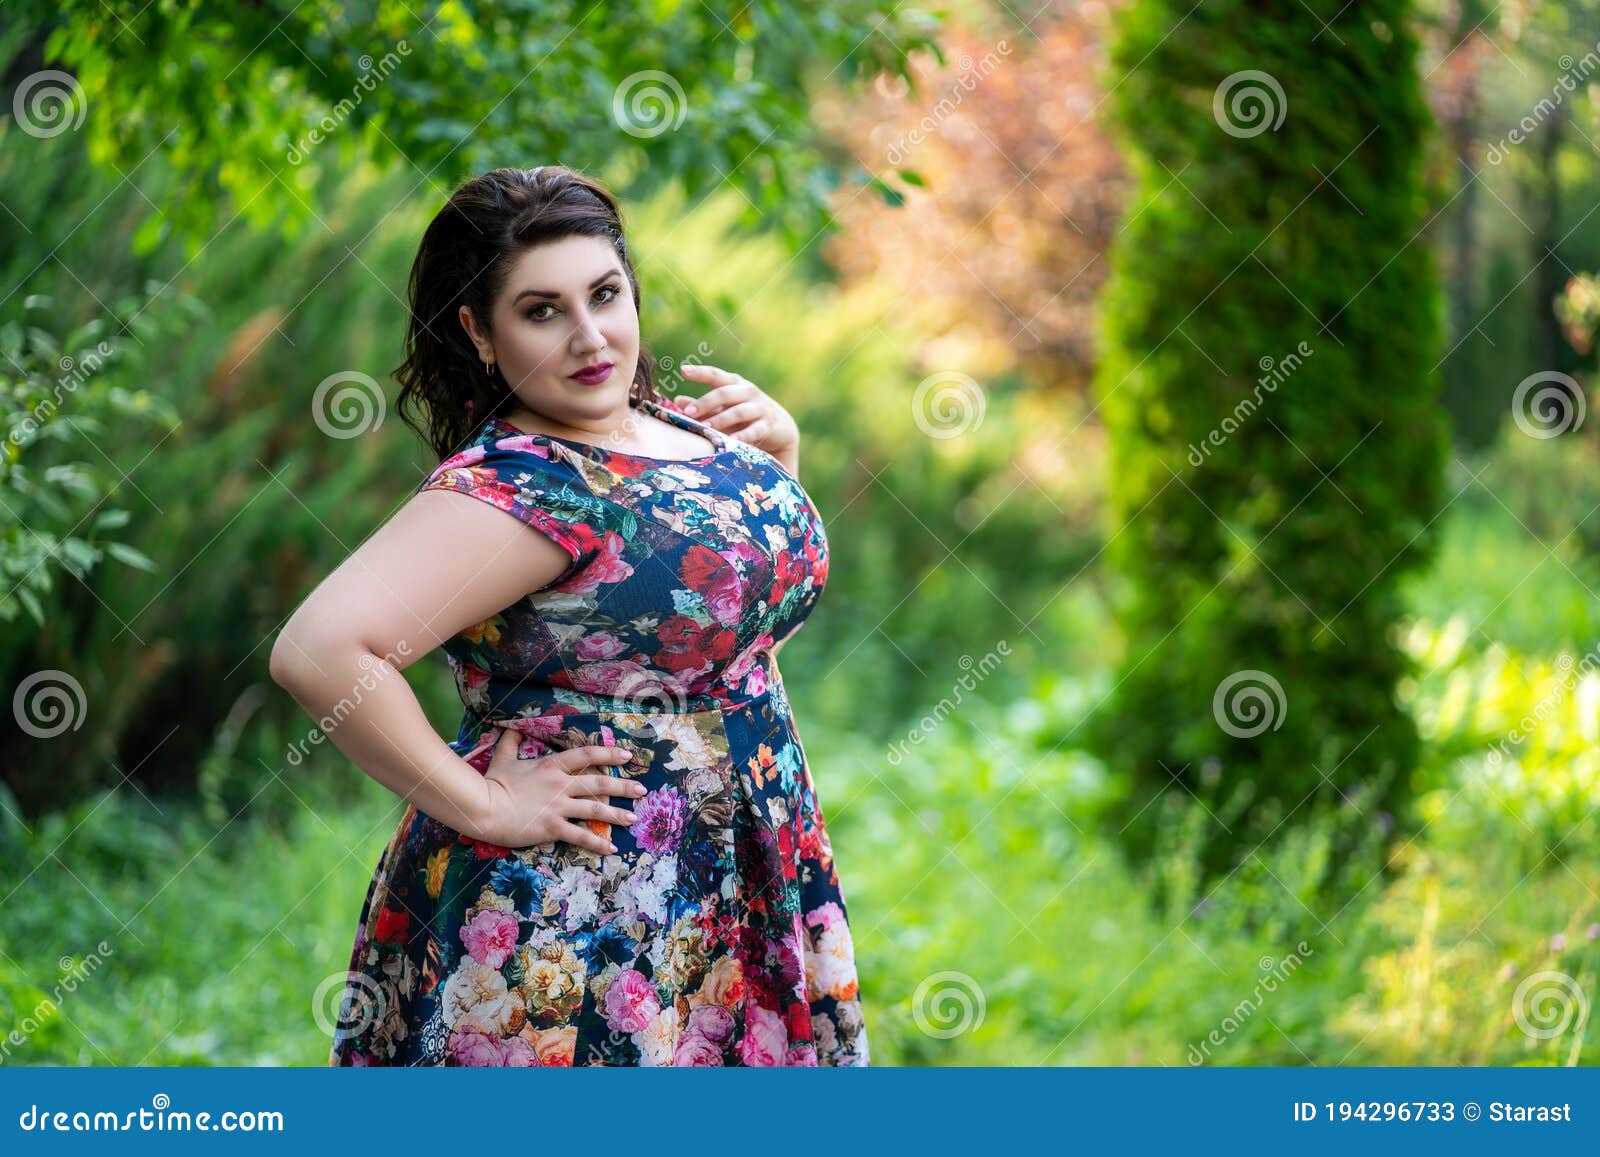 Plus Size Fashion Model in Dress Outdoors, Beautiful Fat Woman with Makeup and Hairstyle Image - Image obesity, fashion: 194296733